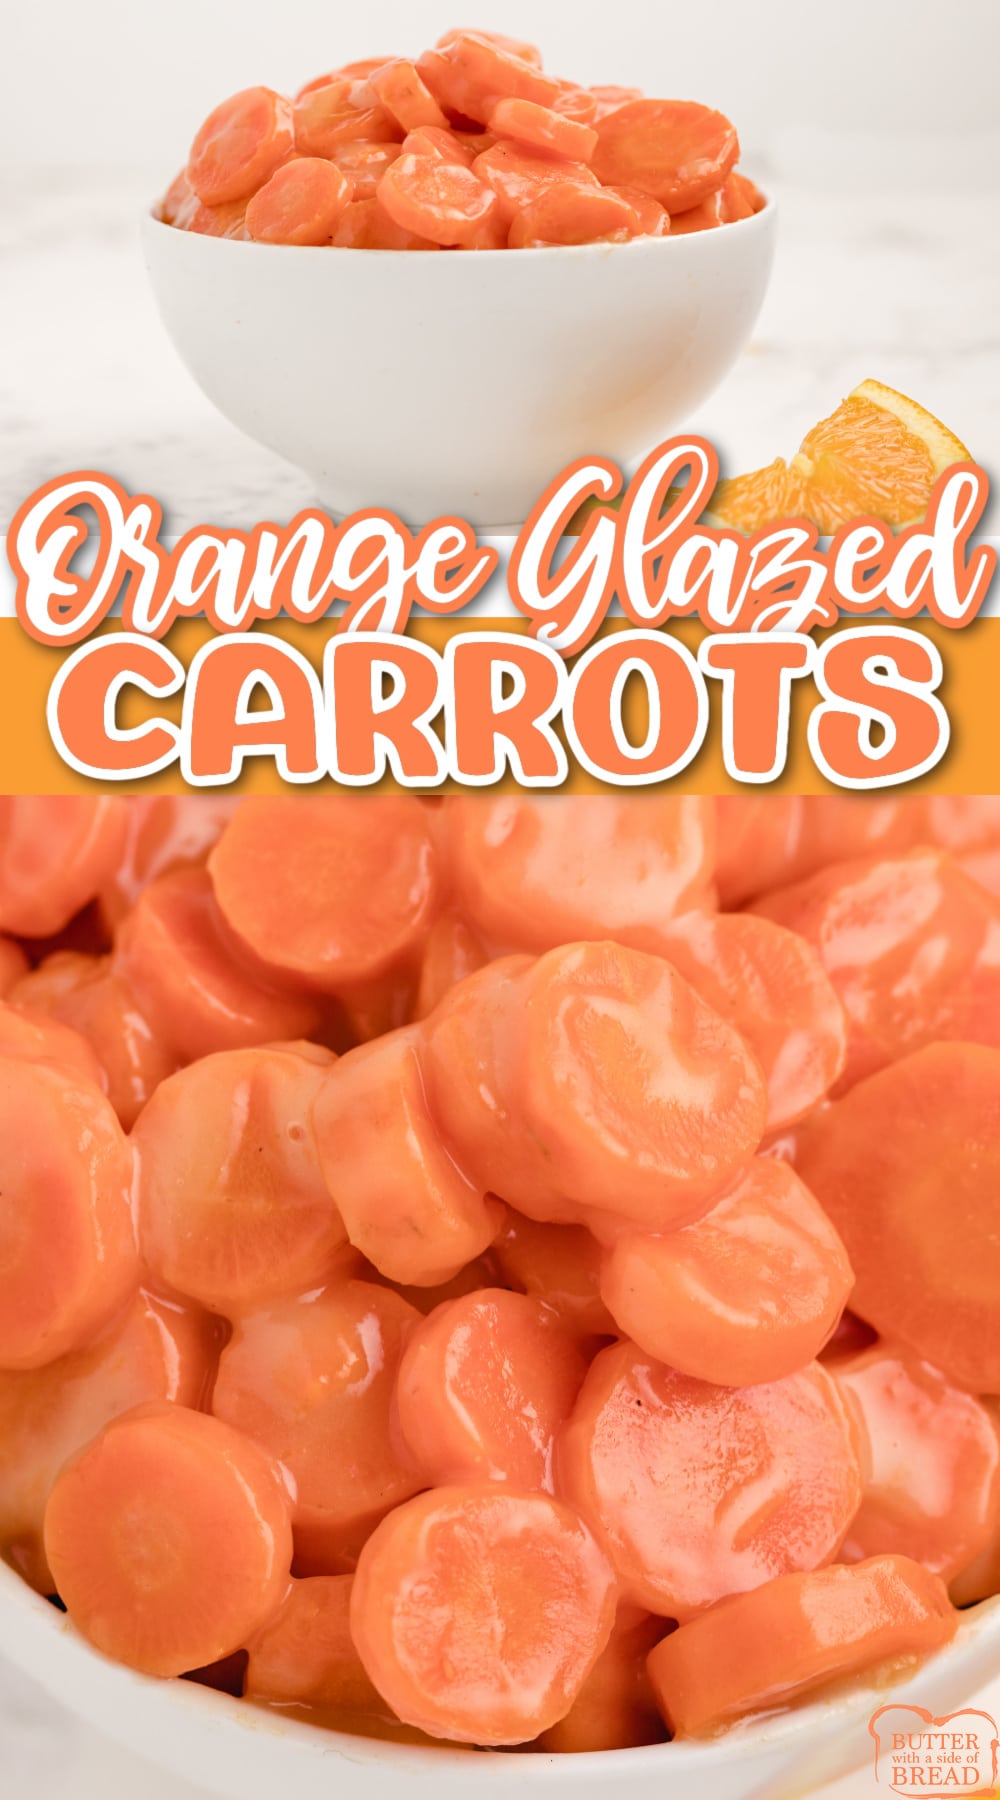 Orange Glazed Carrots are simple, sweet and make the perfect side dish for any meal. Sweet, tender carrots coated with a delicious orange glaze.